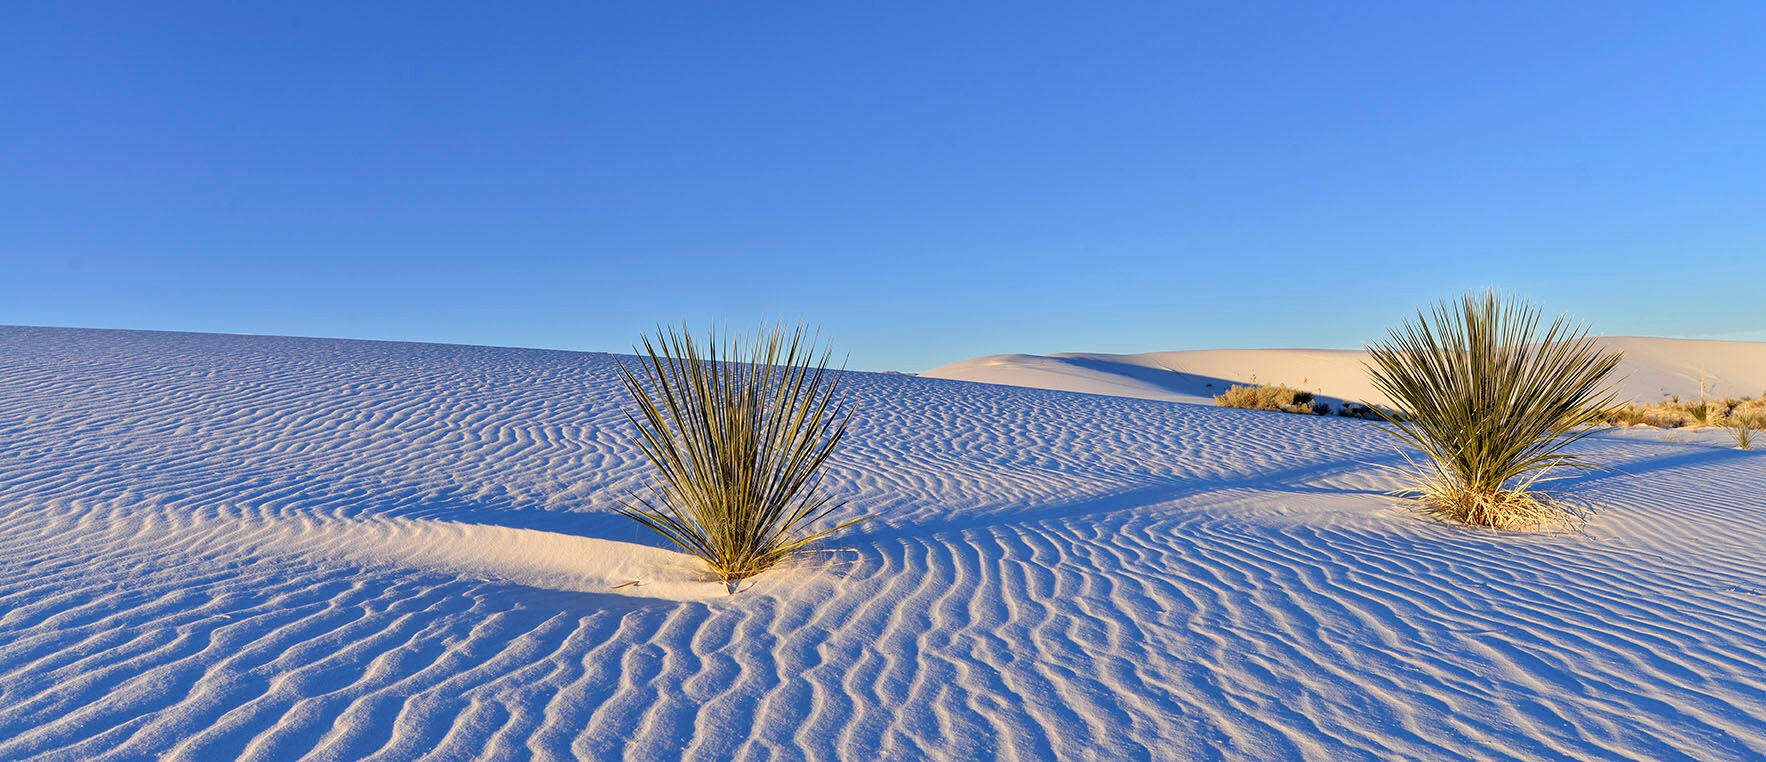 White Sands National Park comprises a vast 275 square mile sea of pure white gypsum sand dunes. You feel as though you have stepped...